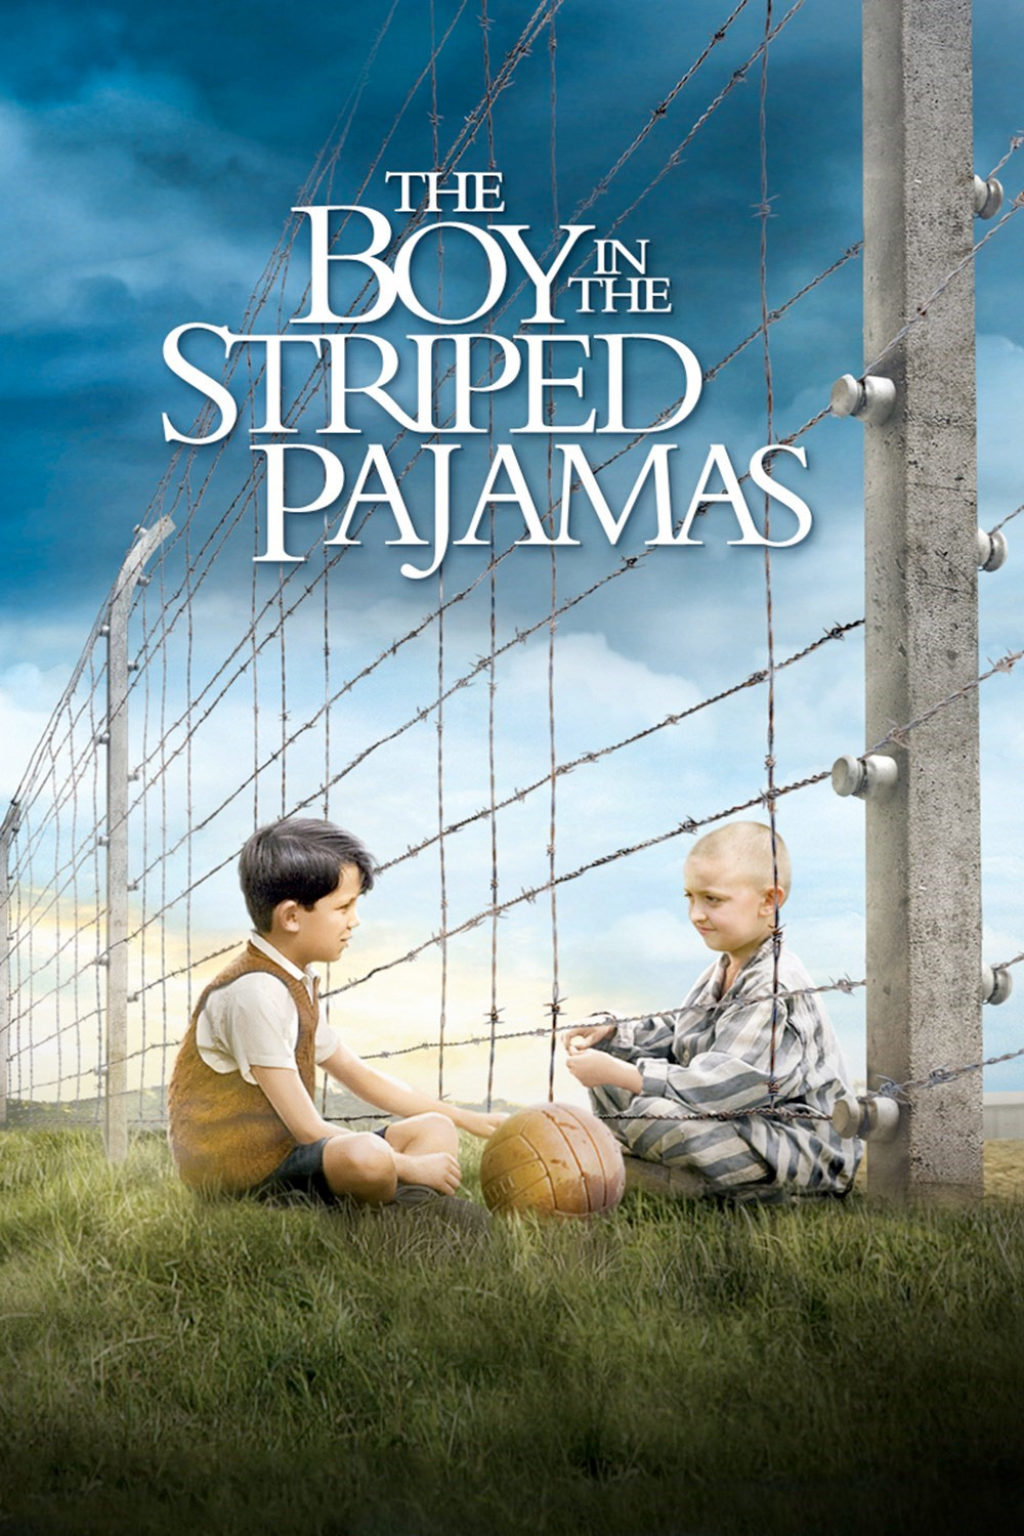 book report on boy in striped pajamas